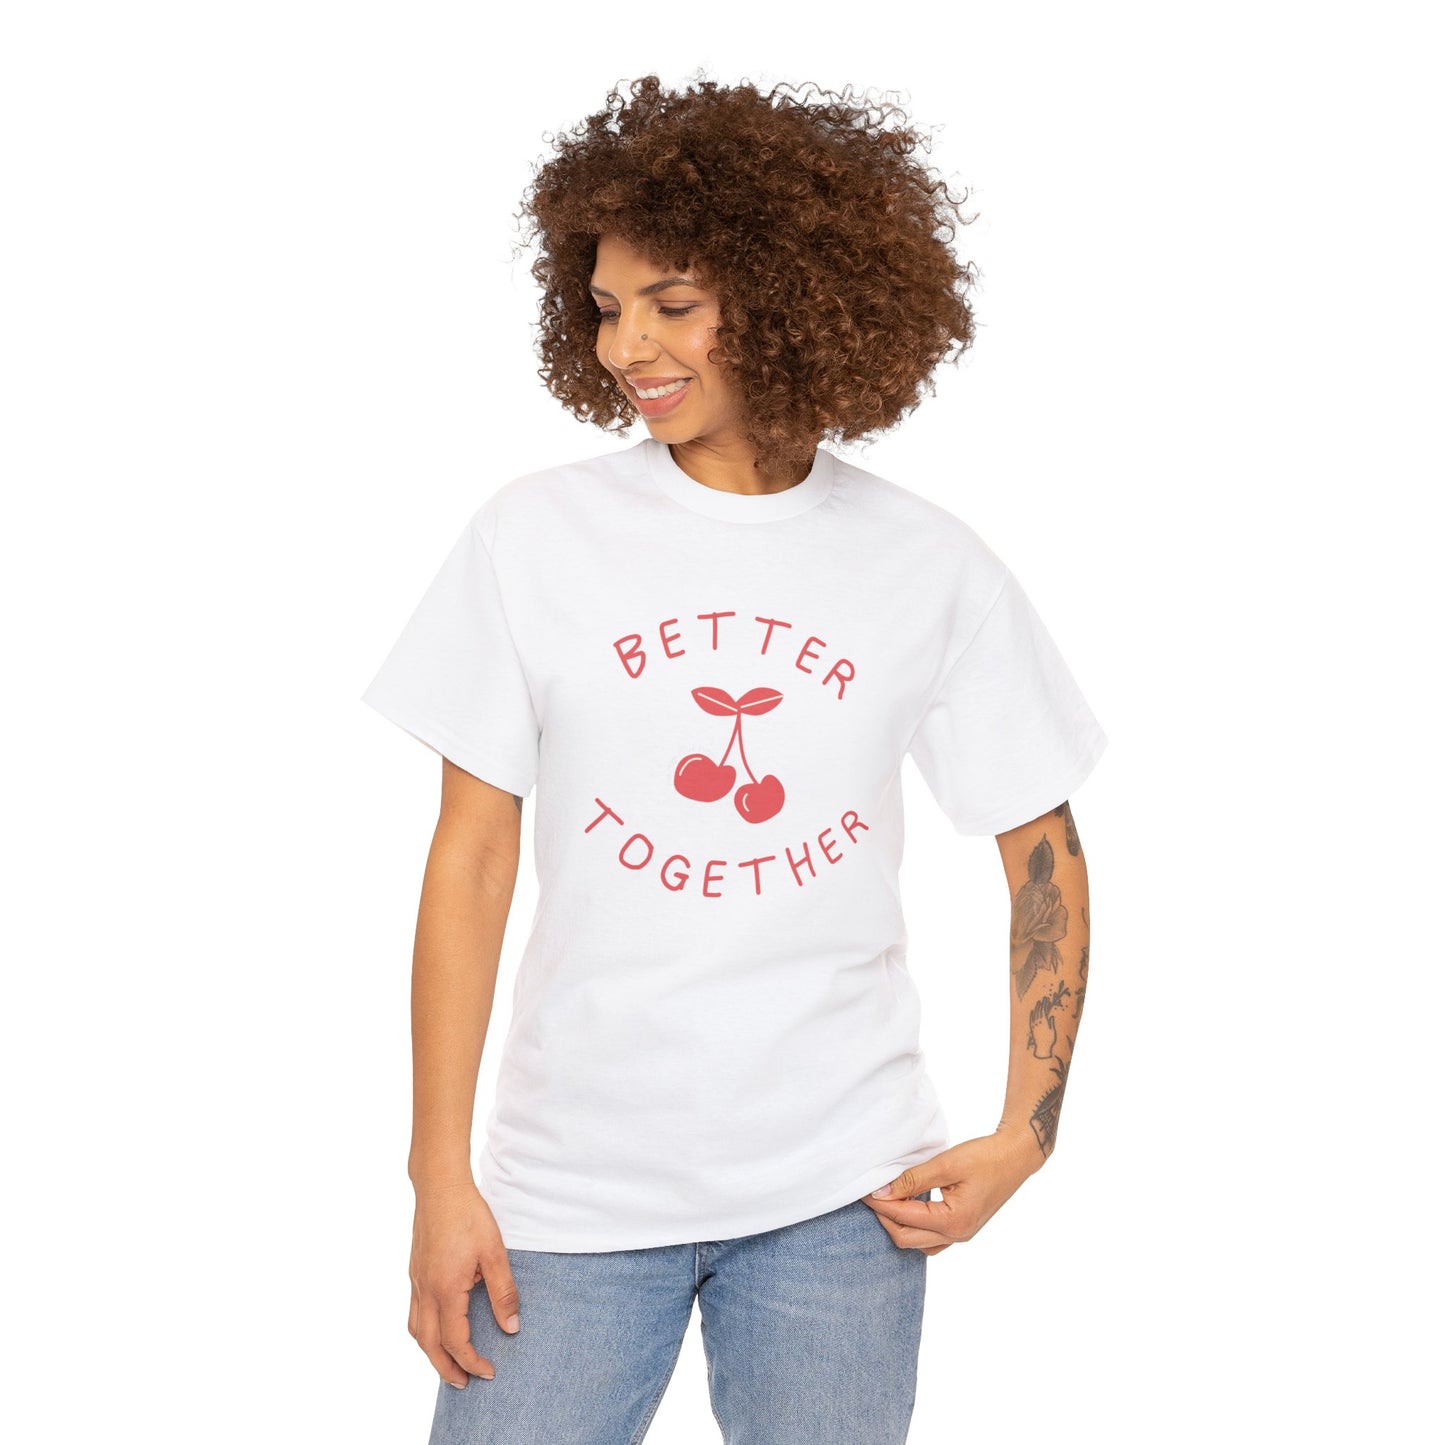 Short-sleeved t-shirt with unisex print -BETTER TOGETHER- for adults